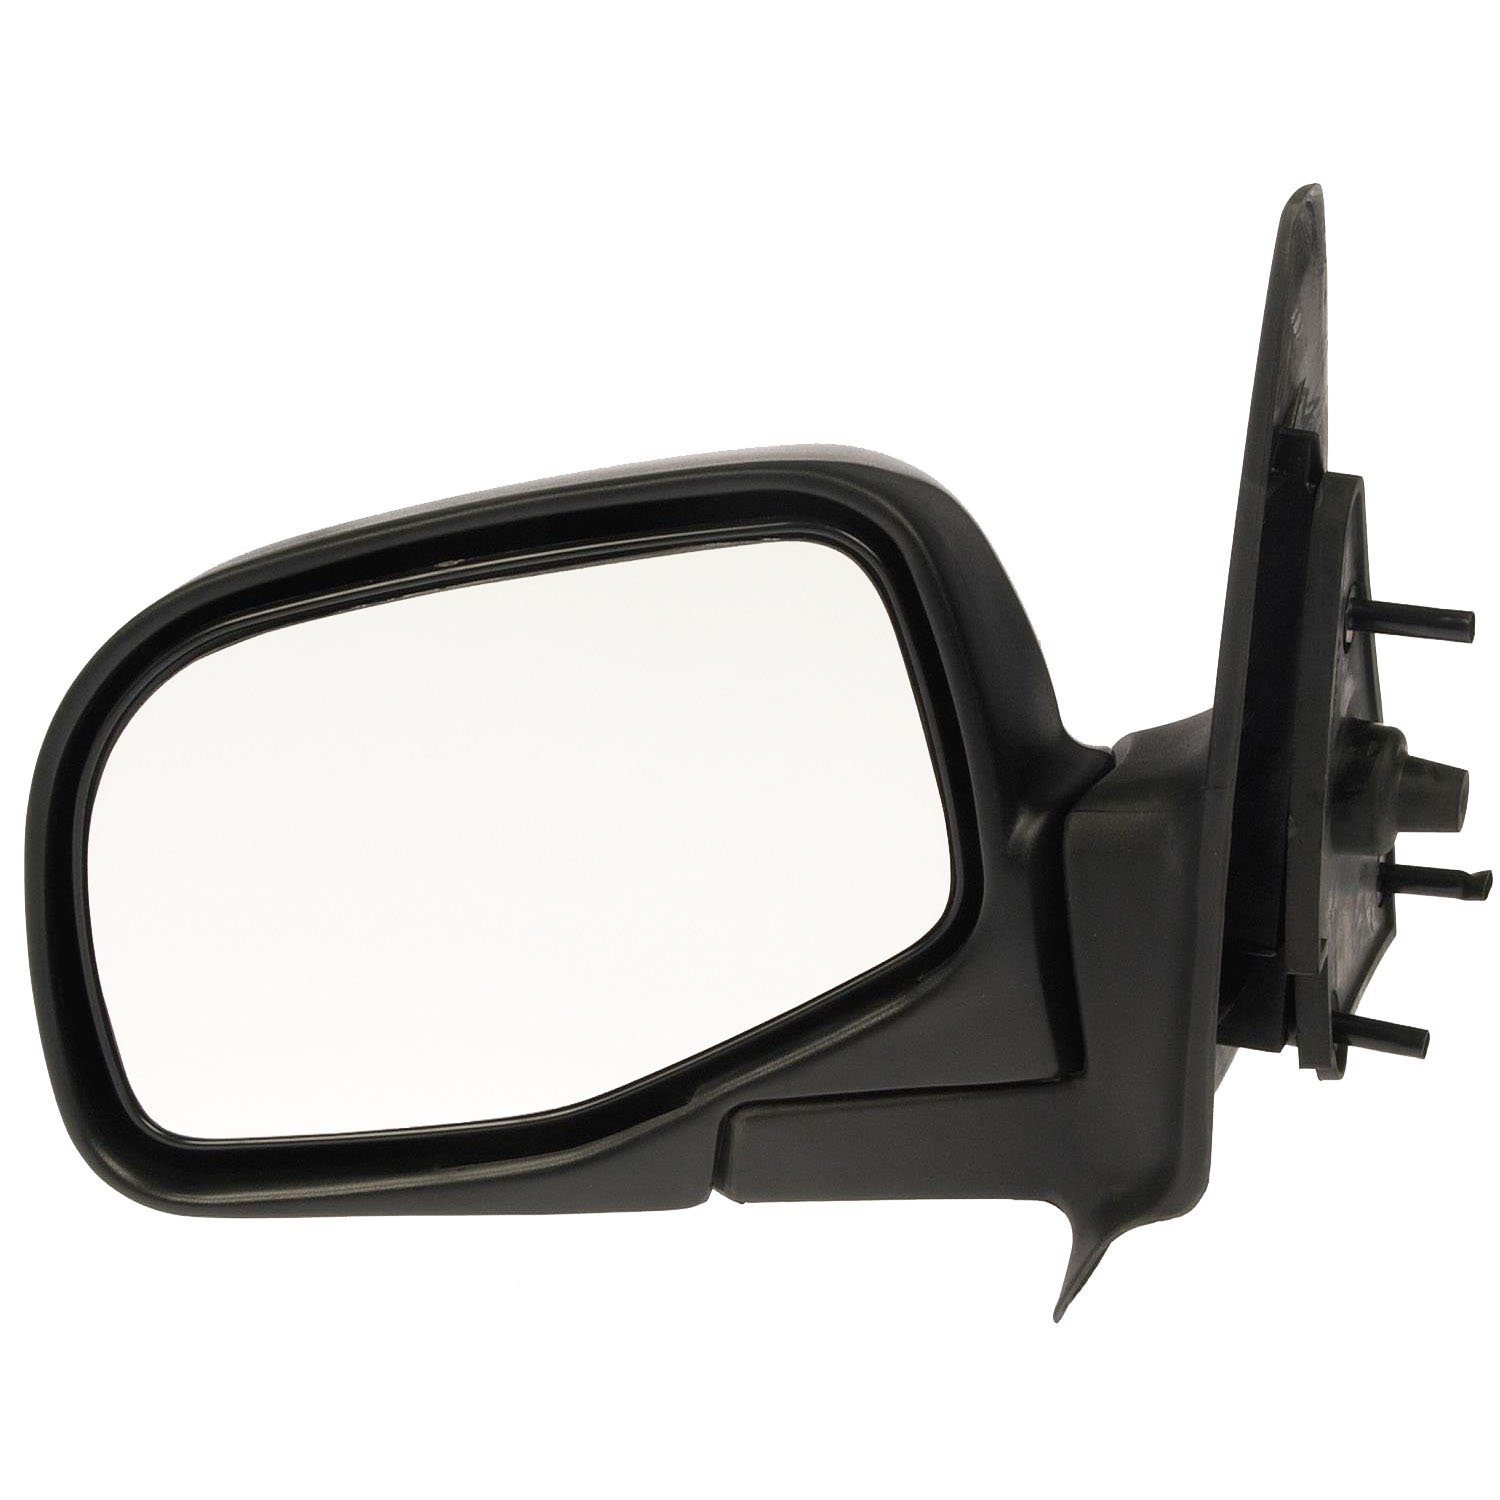 Manual Sideview Mirror for 1998-2002 Ford Ranger [Left/Driver Side]